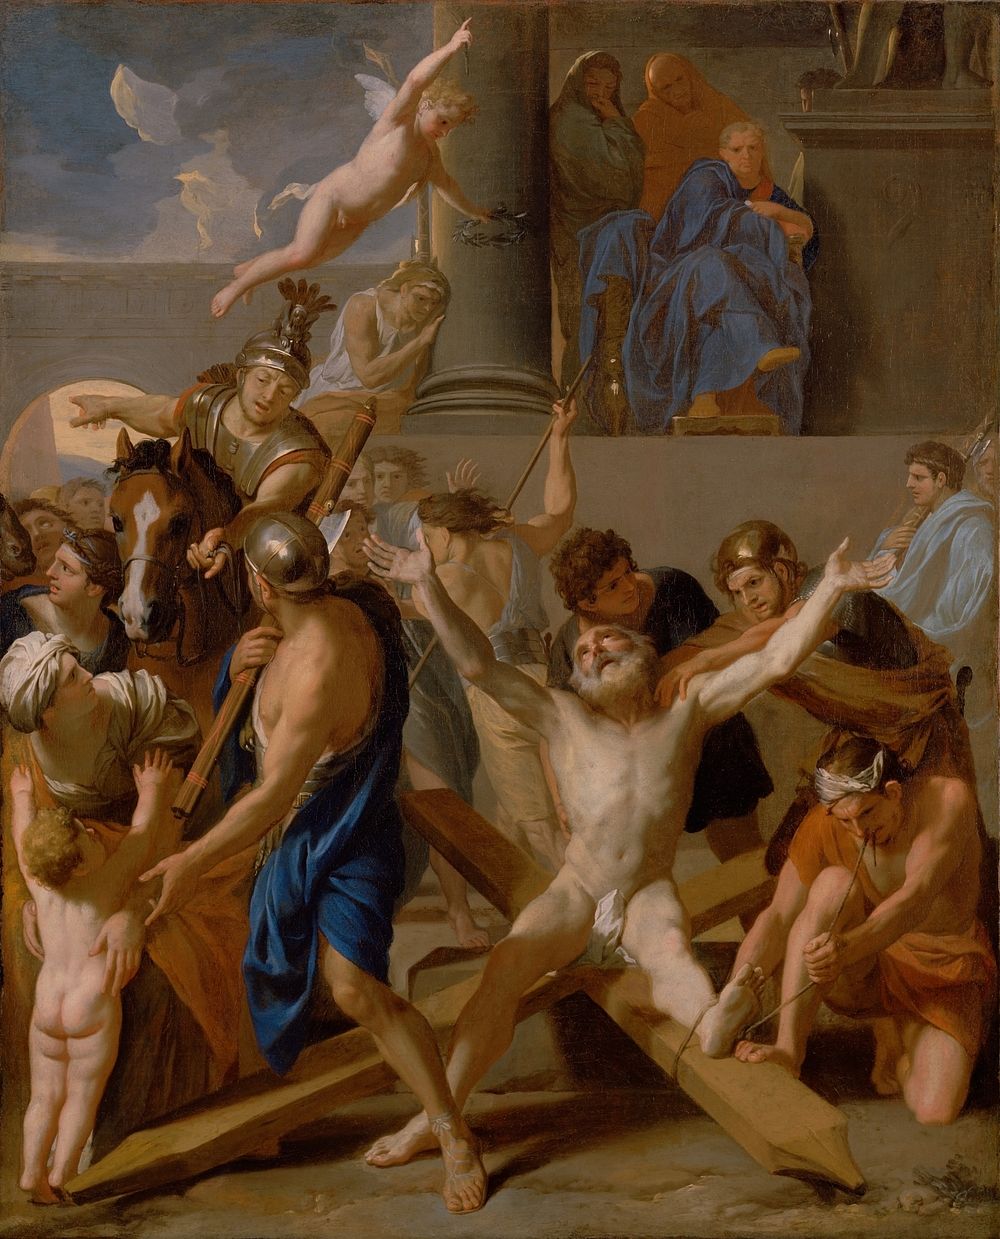 The Martyrdom of Saint Andrew by Charles Le Brun